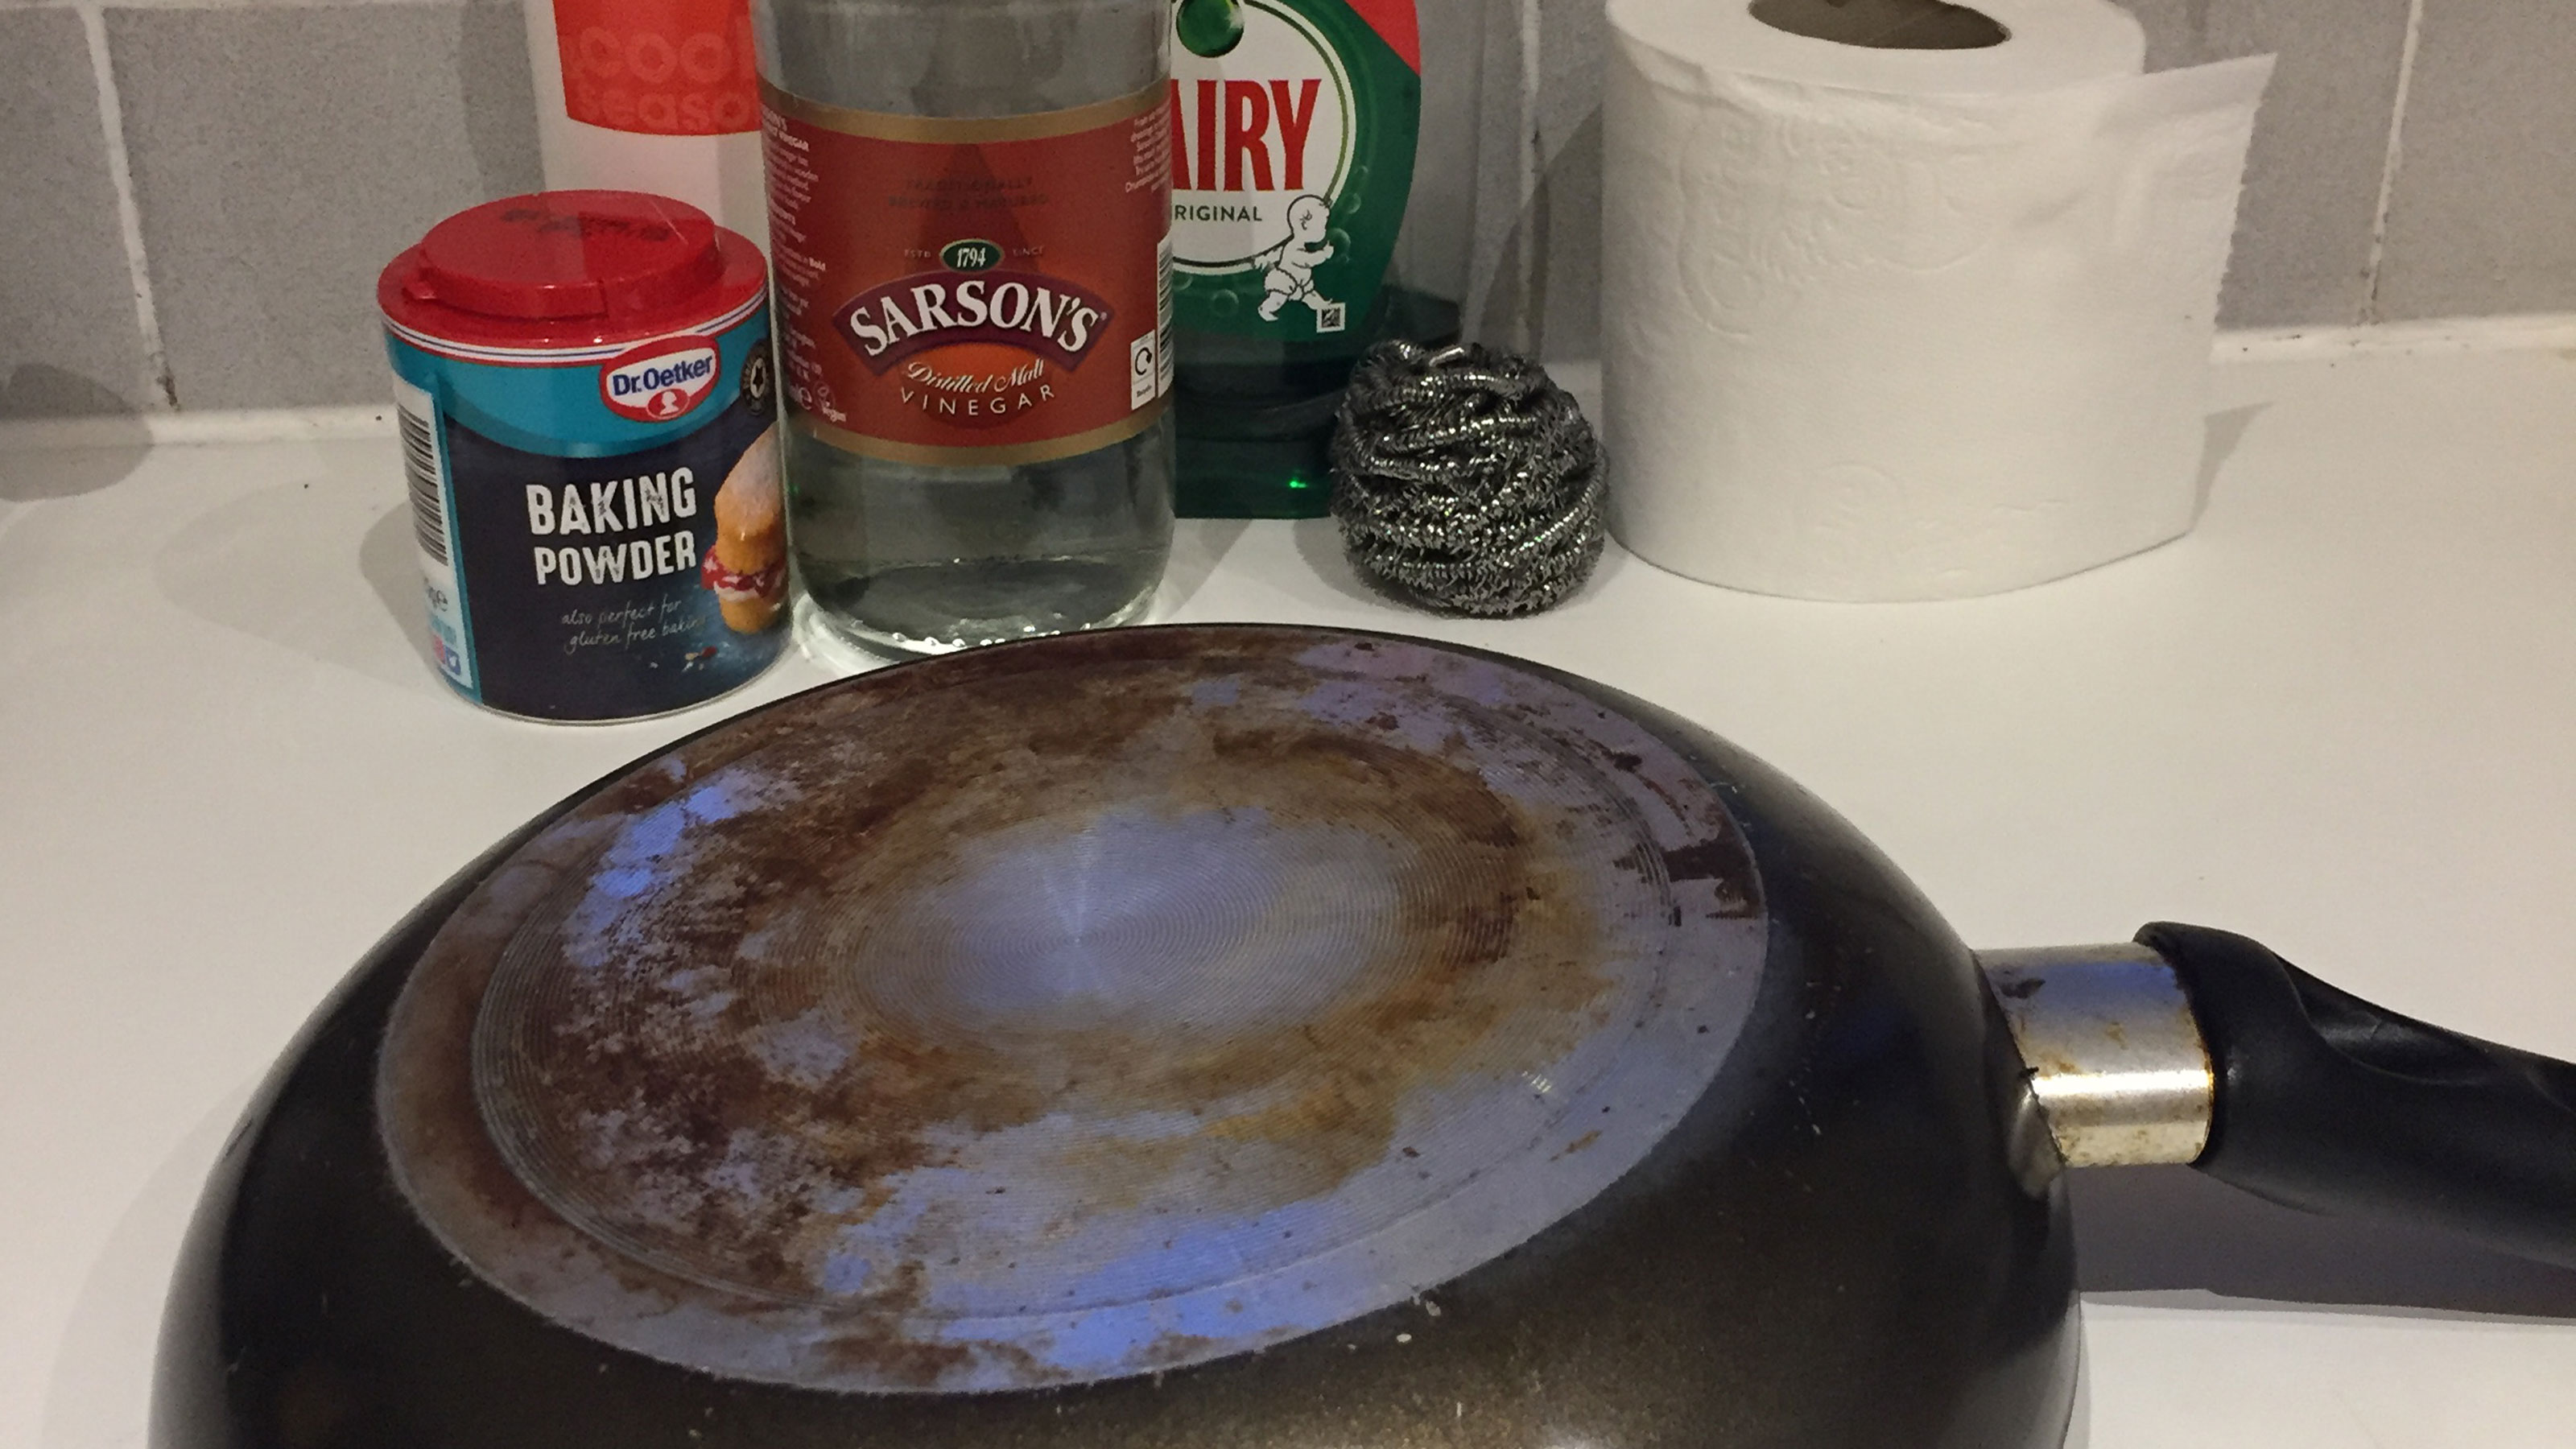 Pan cleaning myths and what actually works - CNET